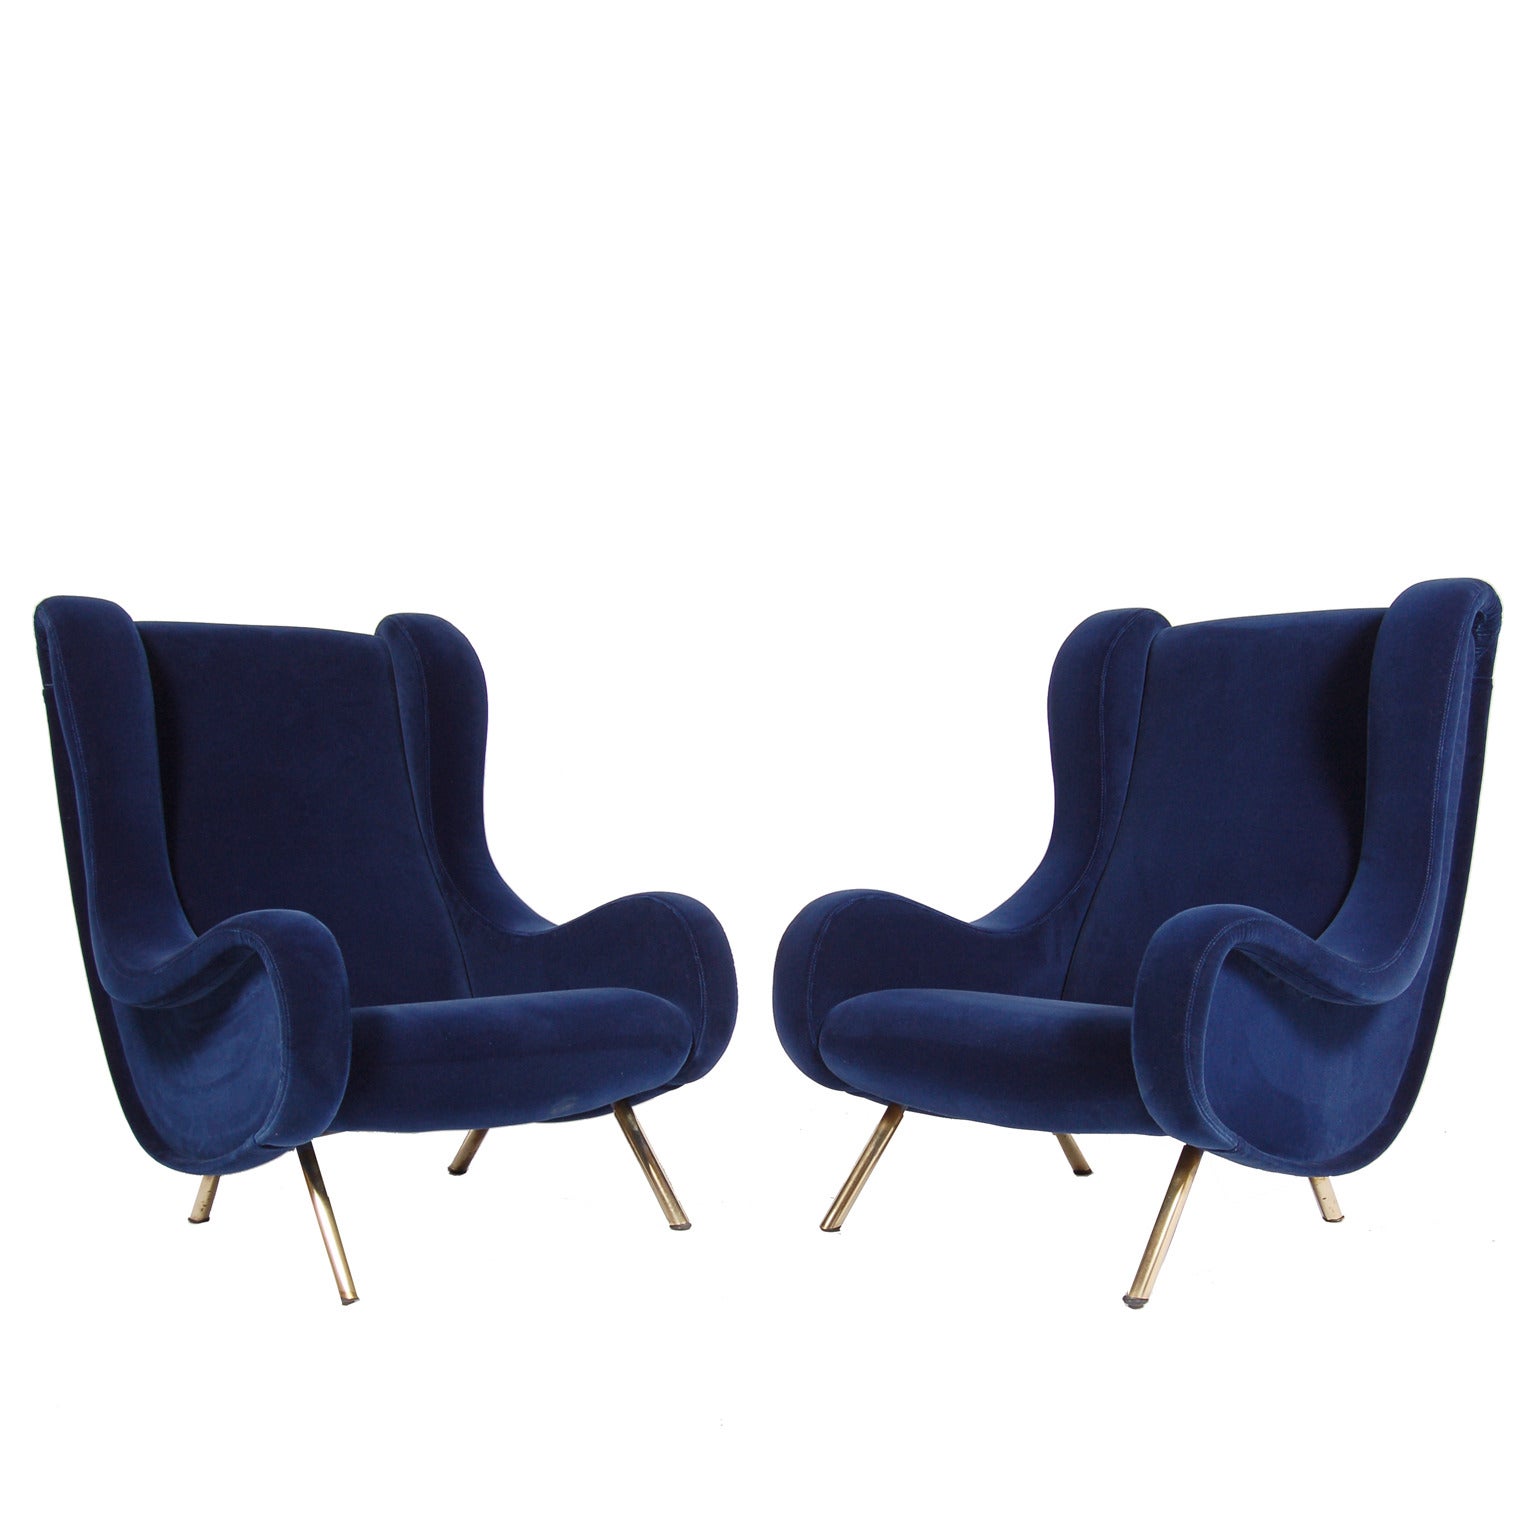 Pair of Senior Lounge Chairs by Marco Zanuso